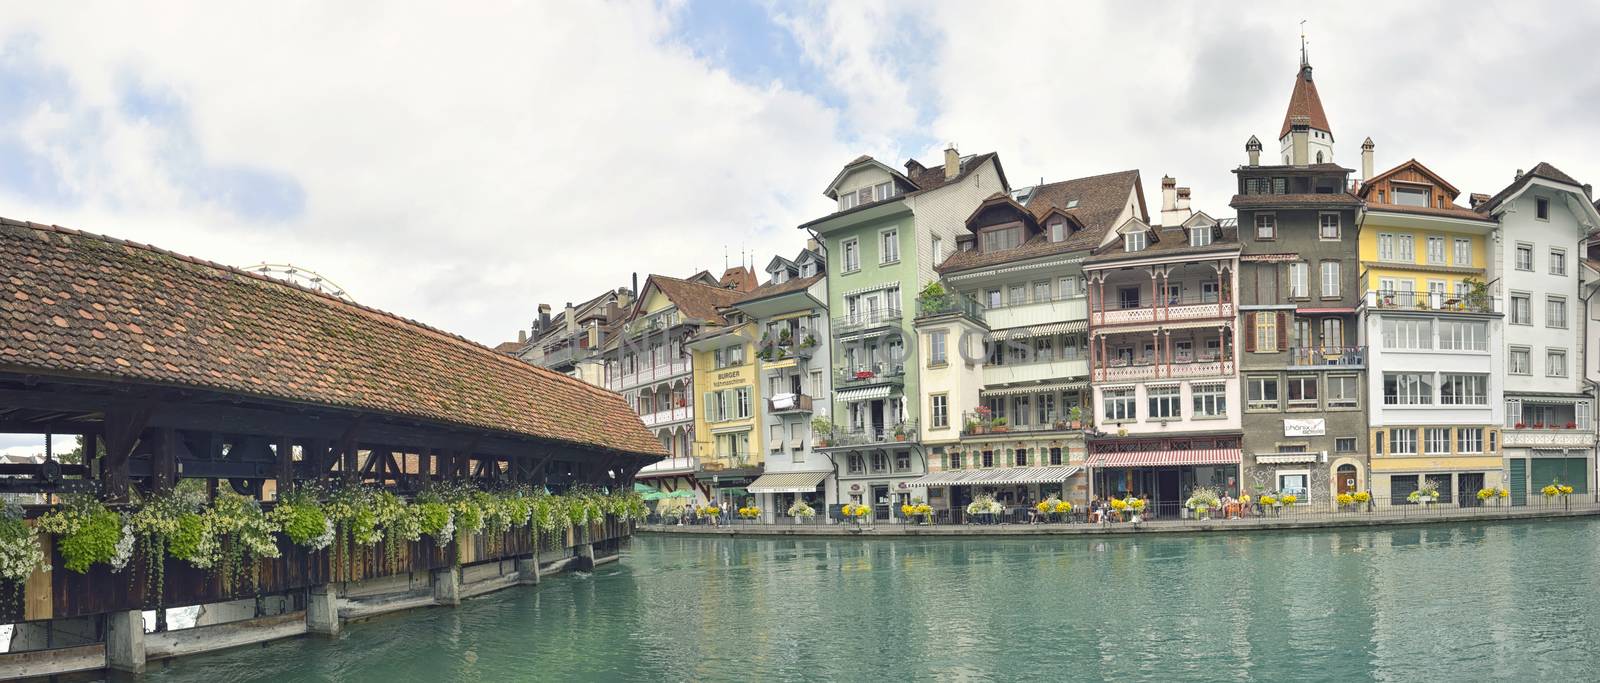 Thun city and river in Aare, Switzerland - 23 july 2017